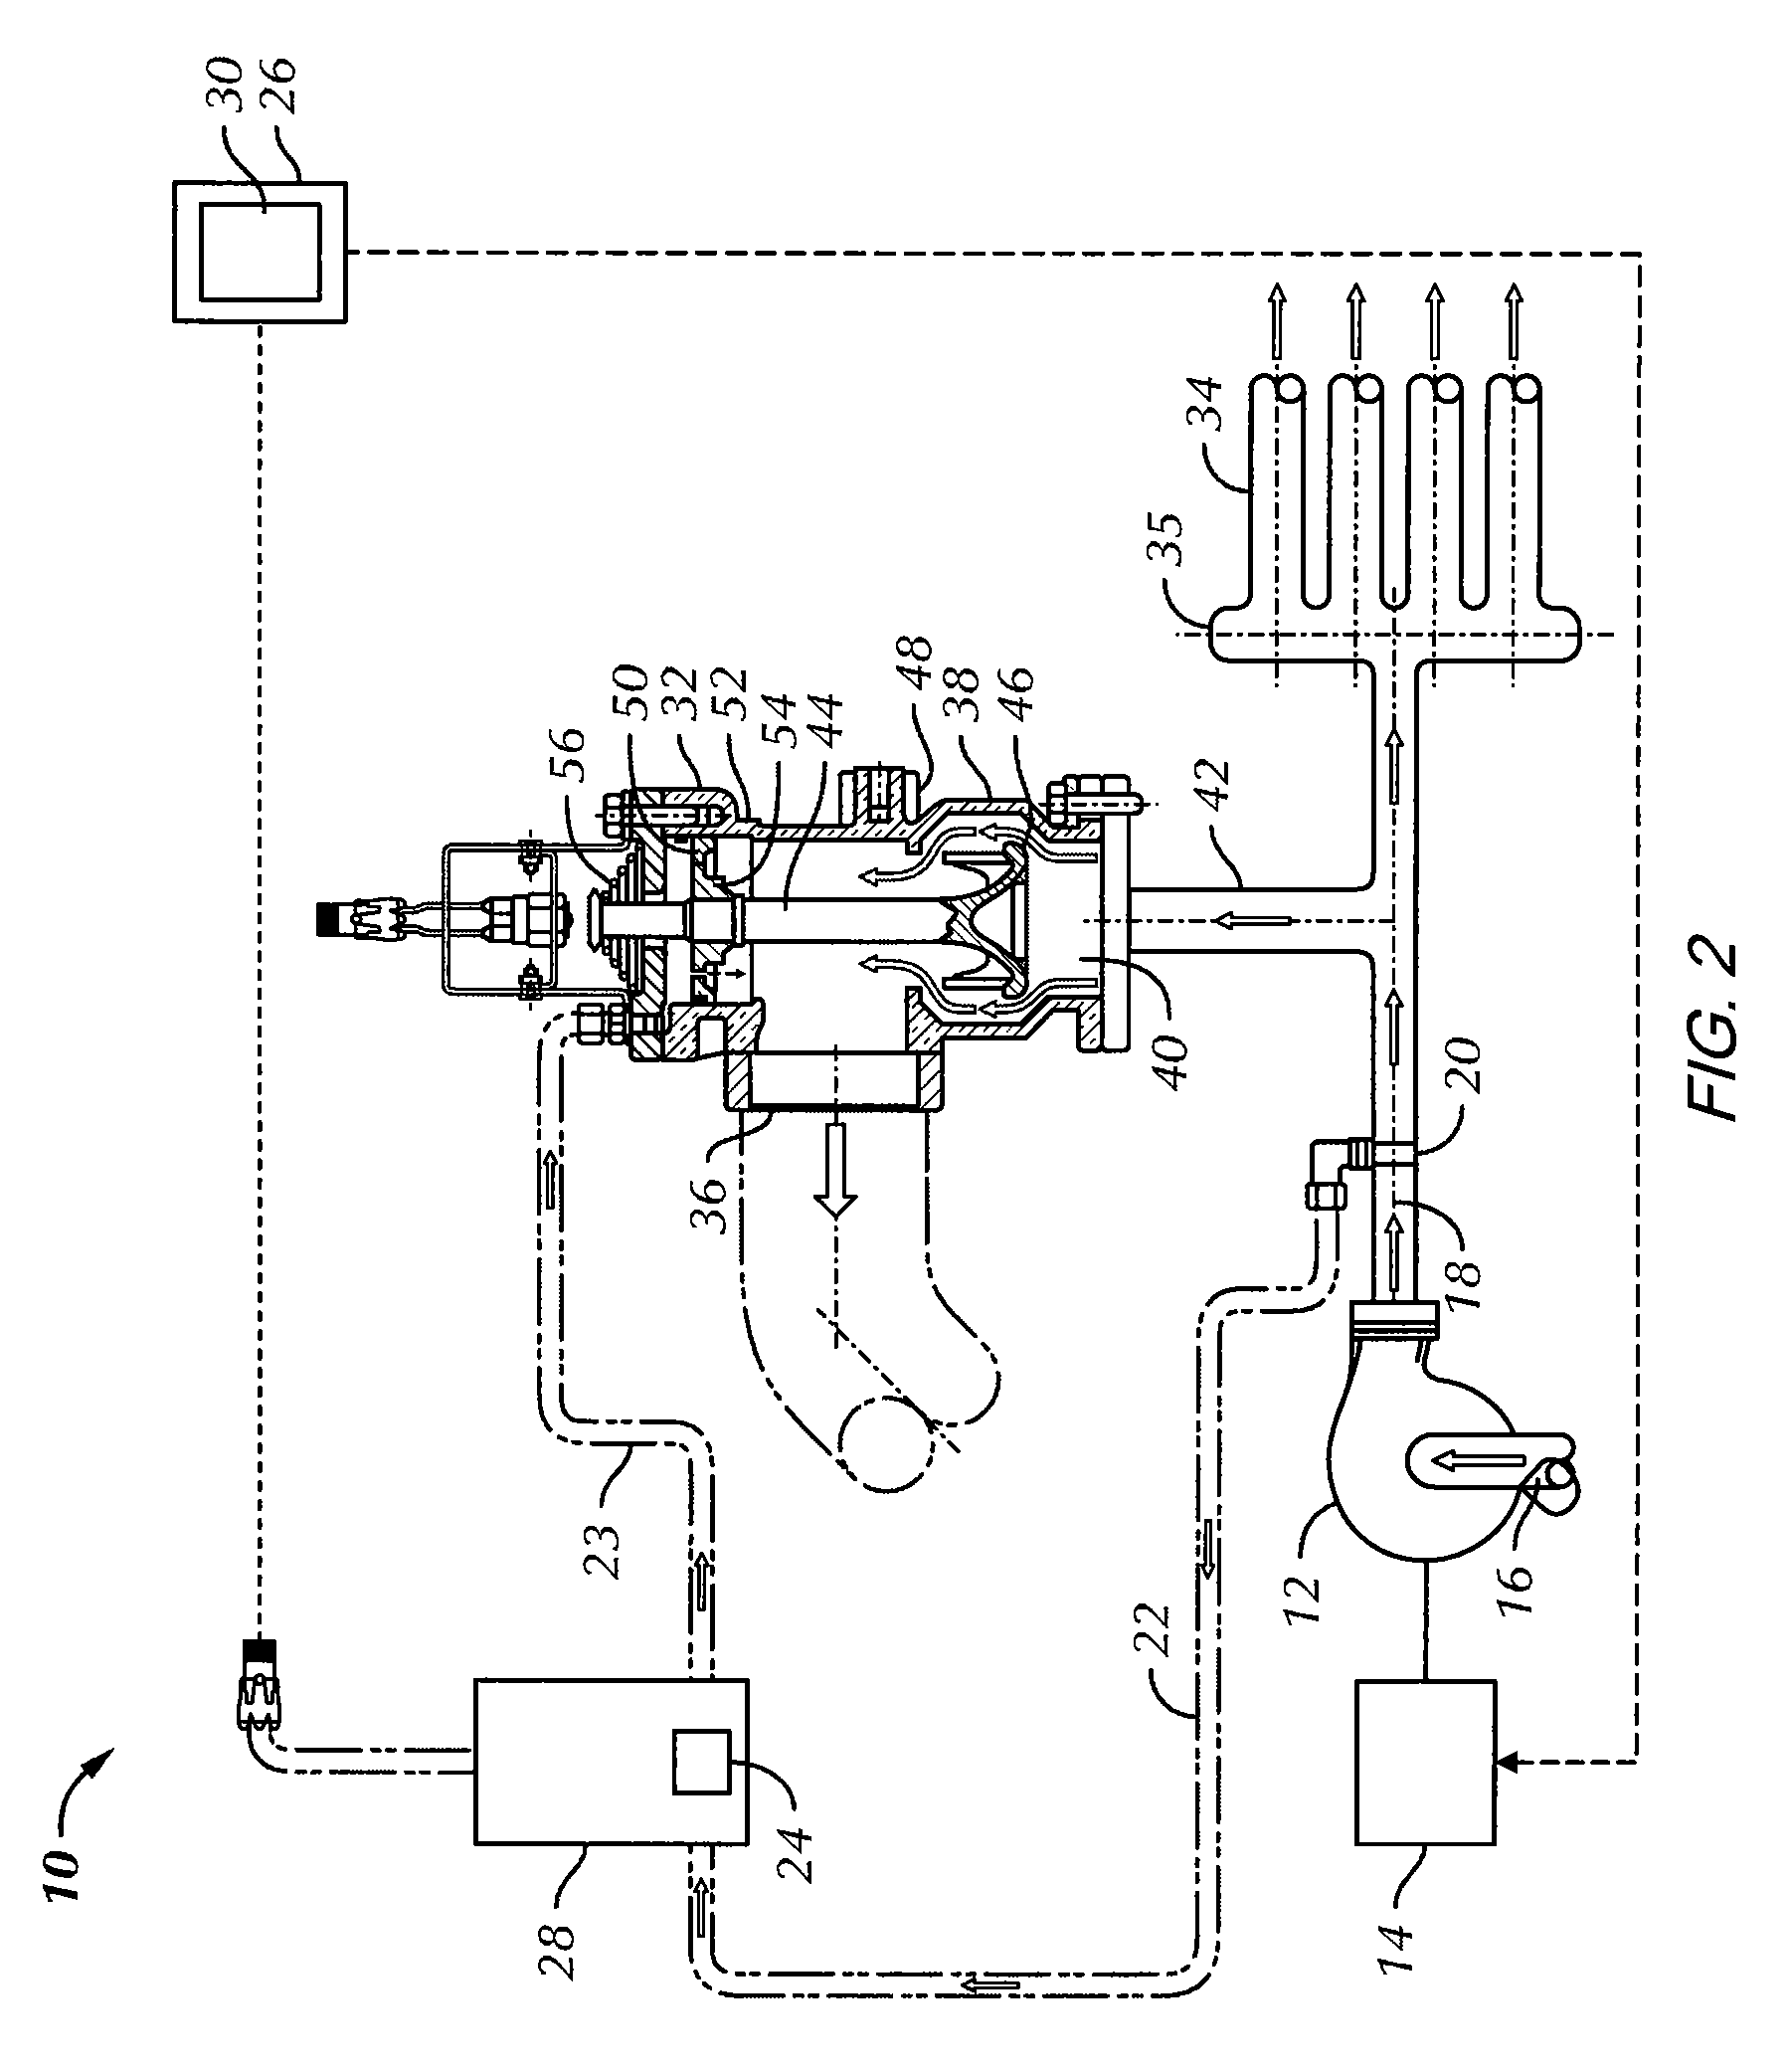 Method for Controlling the Discharge Pressure of an Engine-Driven Pump